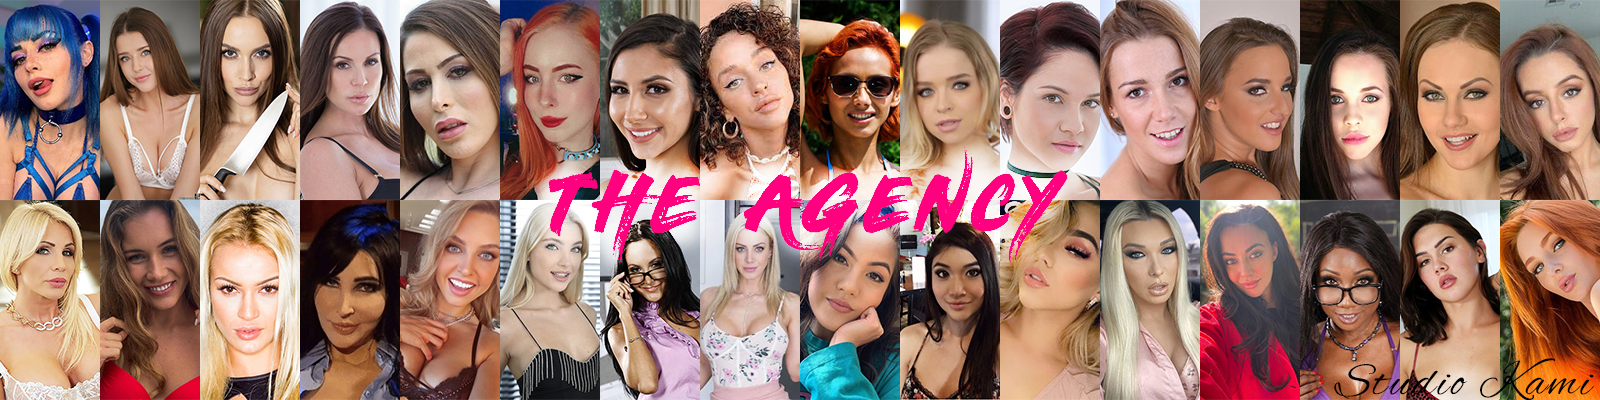 The Agency1.png